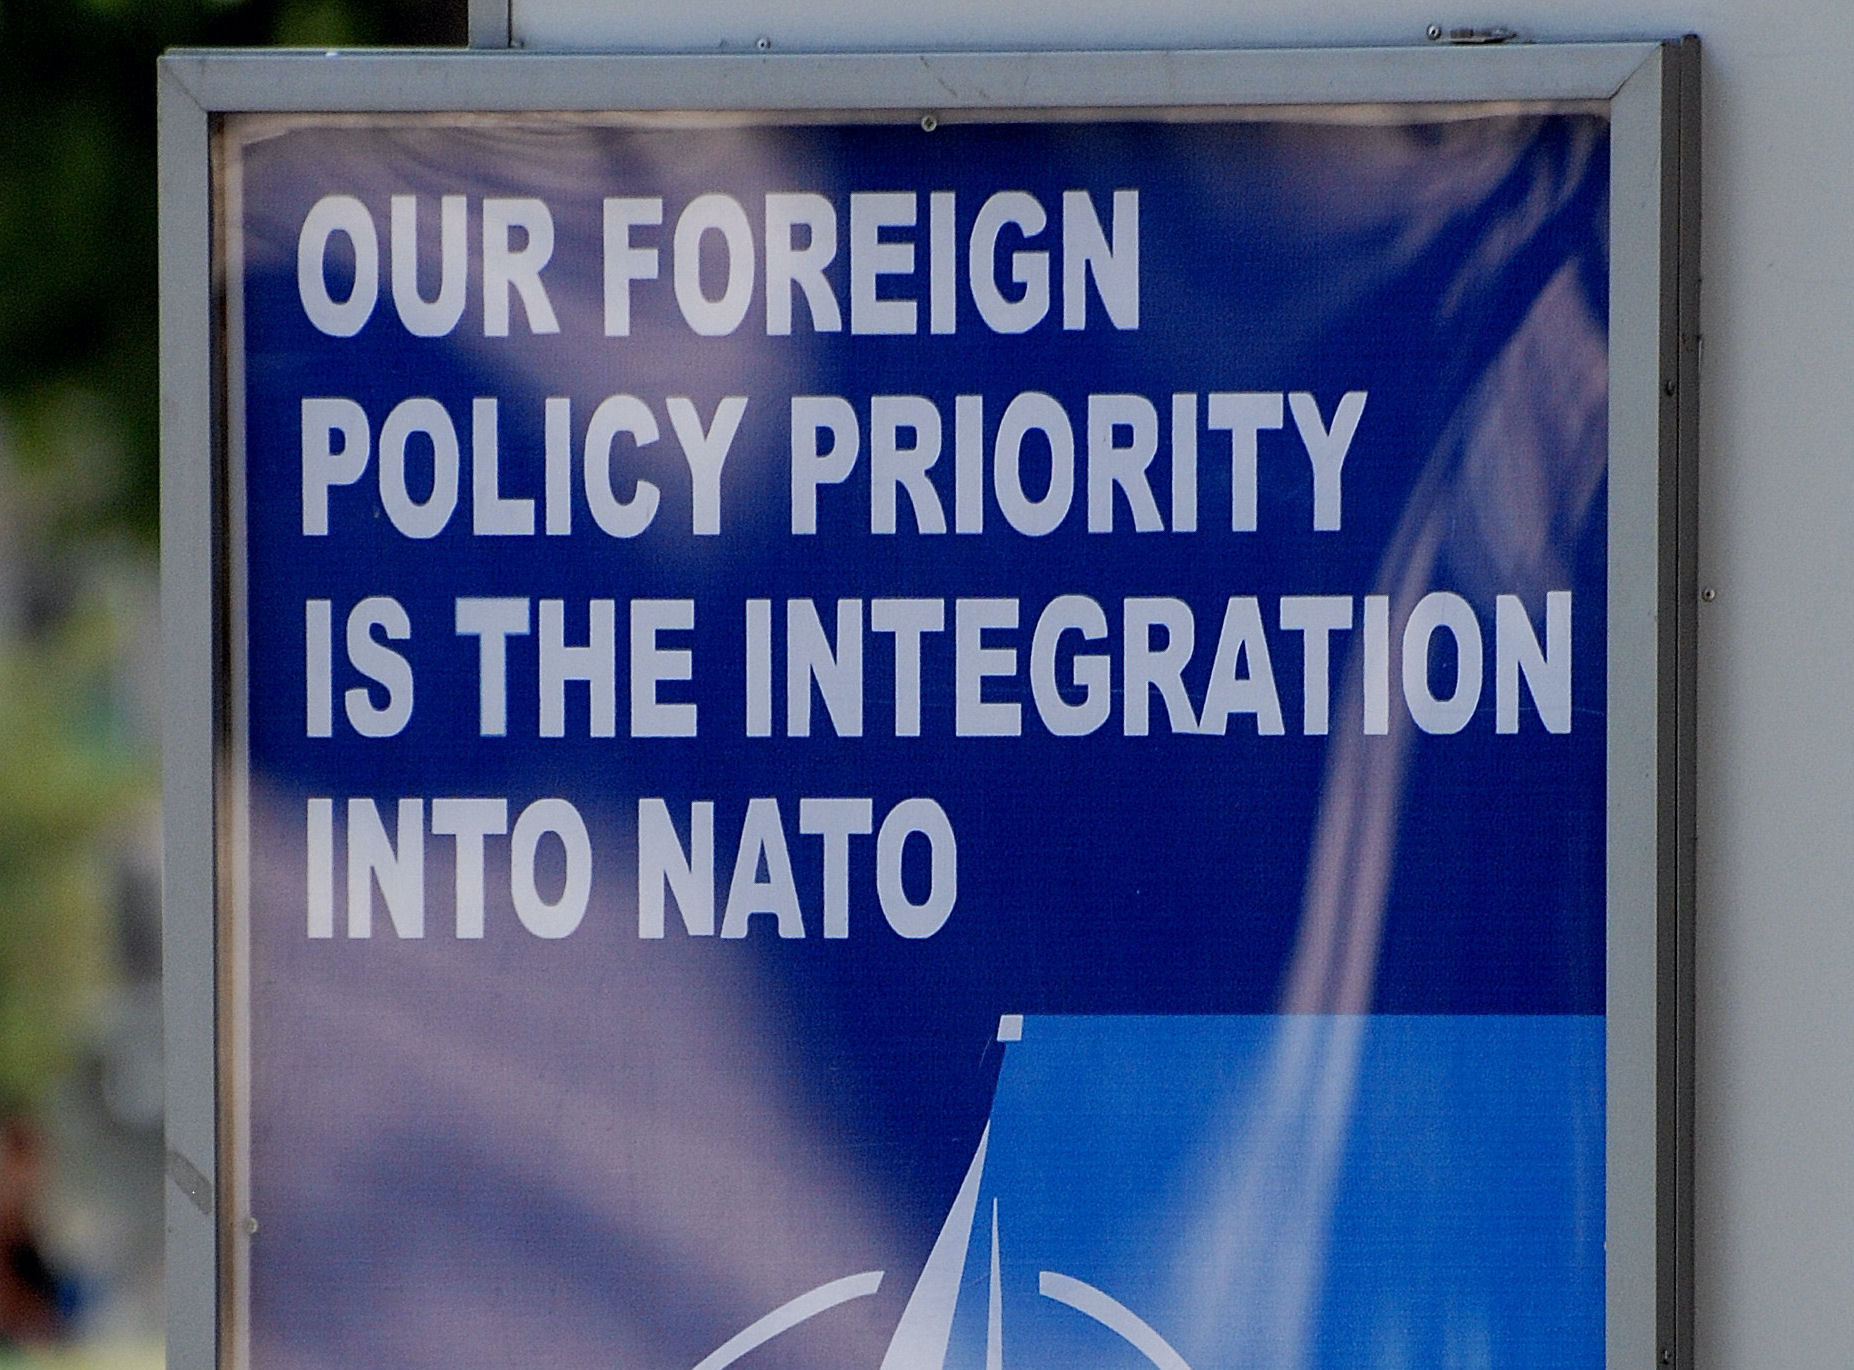 August 2009 sign in downtown Tbilisi with the text "Our Foreign Policy Priority is the Integration into NATO"